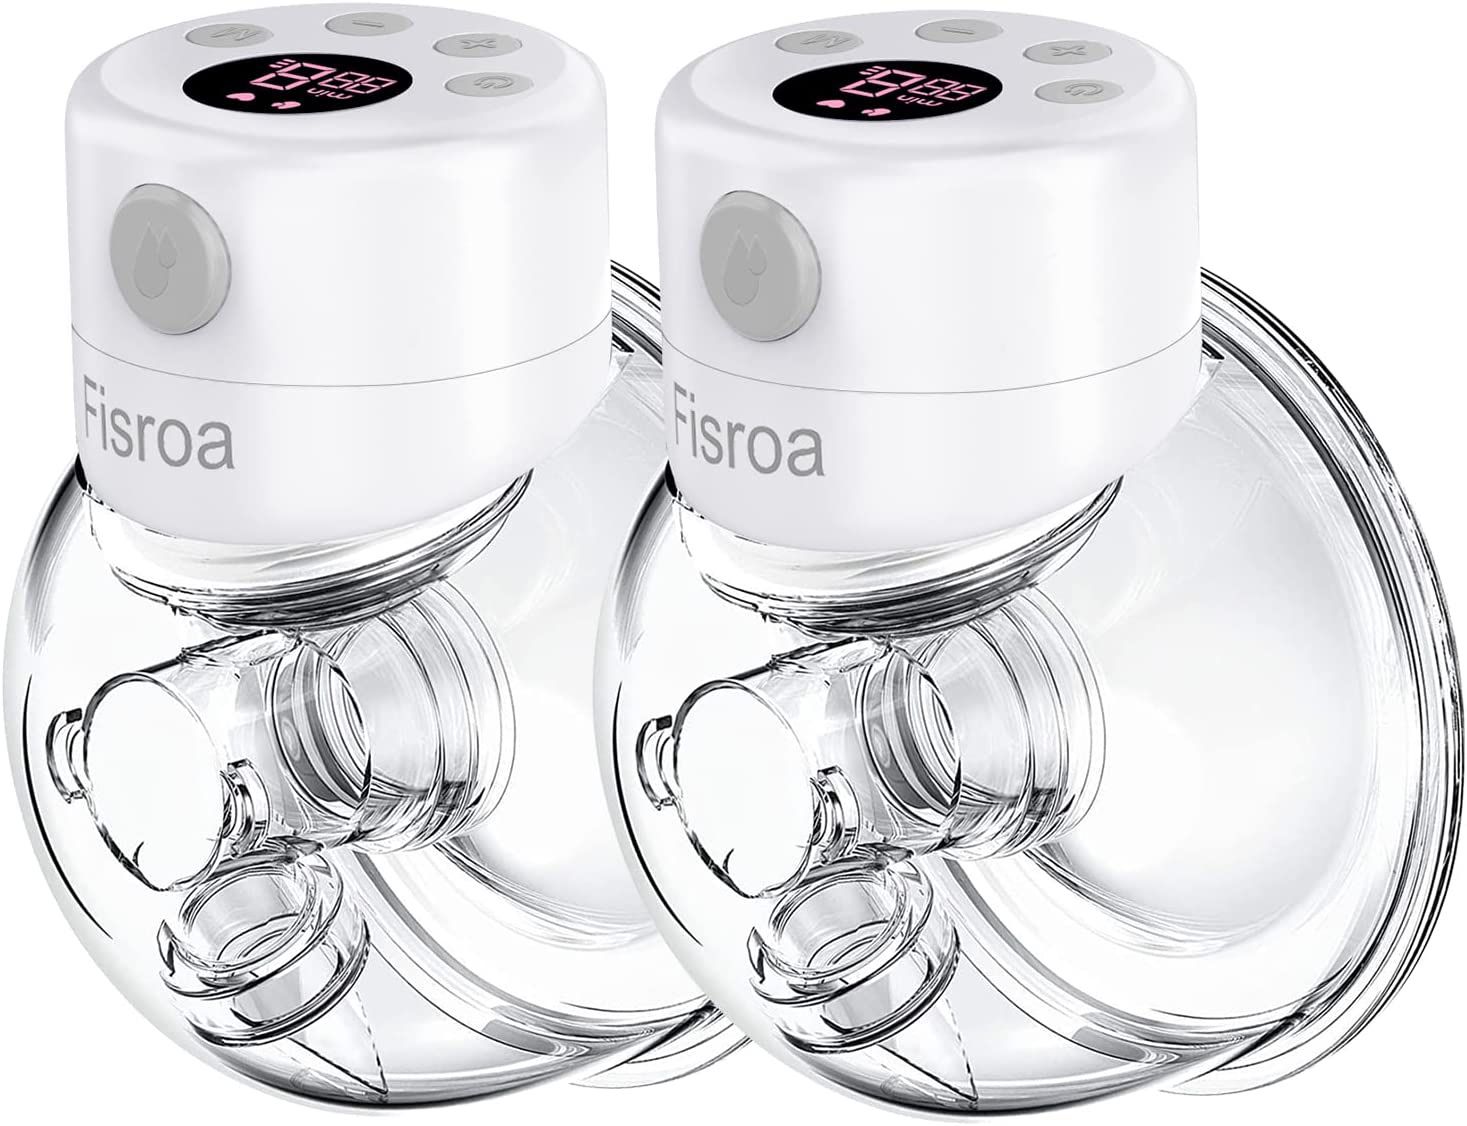 Wearable Breast Pump, Fisroa Double Hands Free Breast Pump with 2 Modes & 9 Levels Low Noise Wireless Electric Breast Pump with LCD Display and Memory